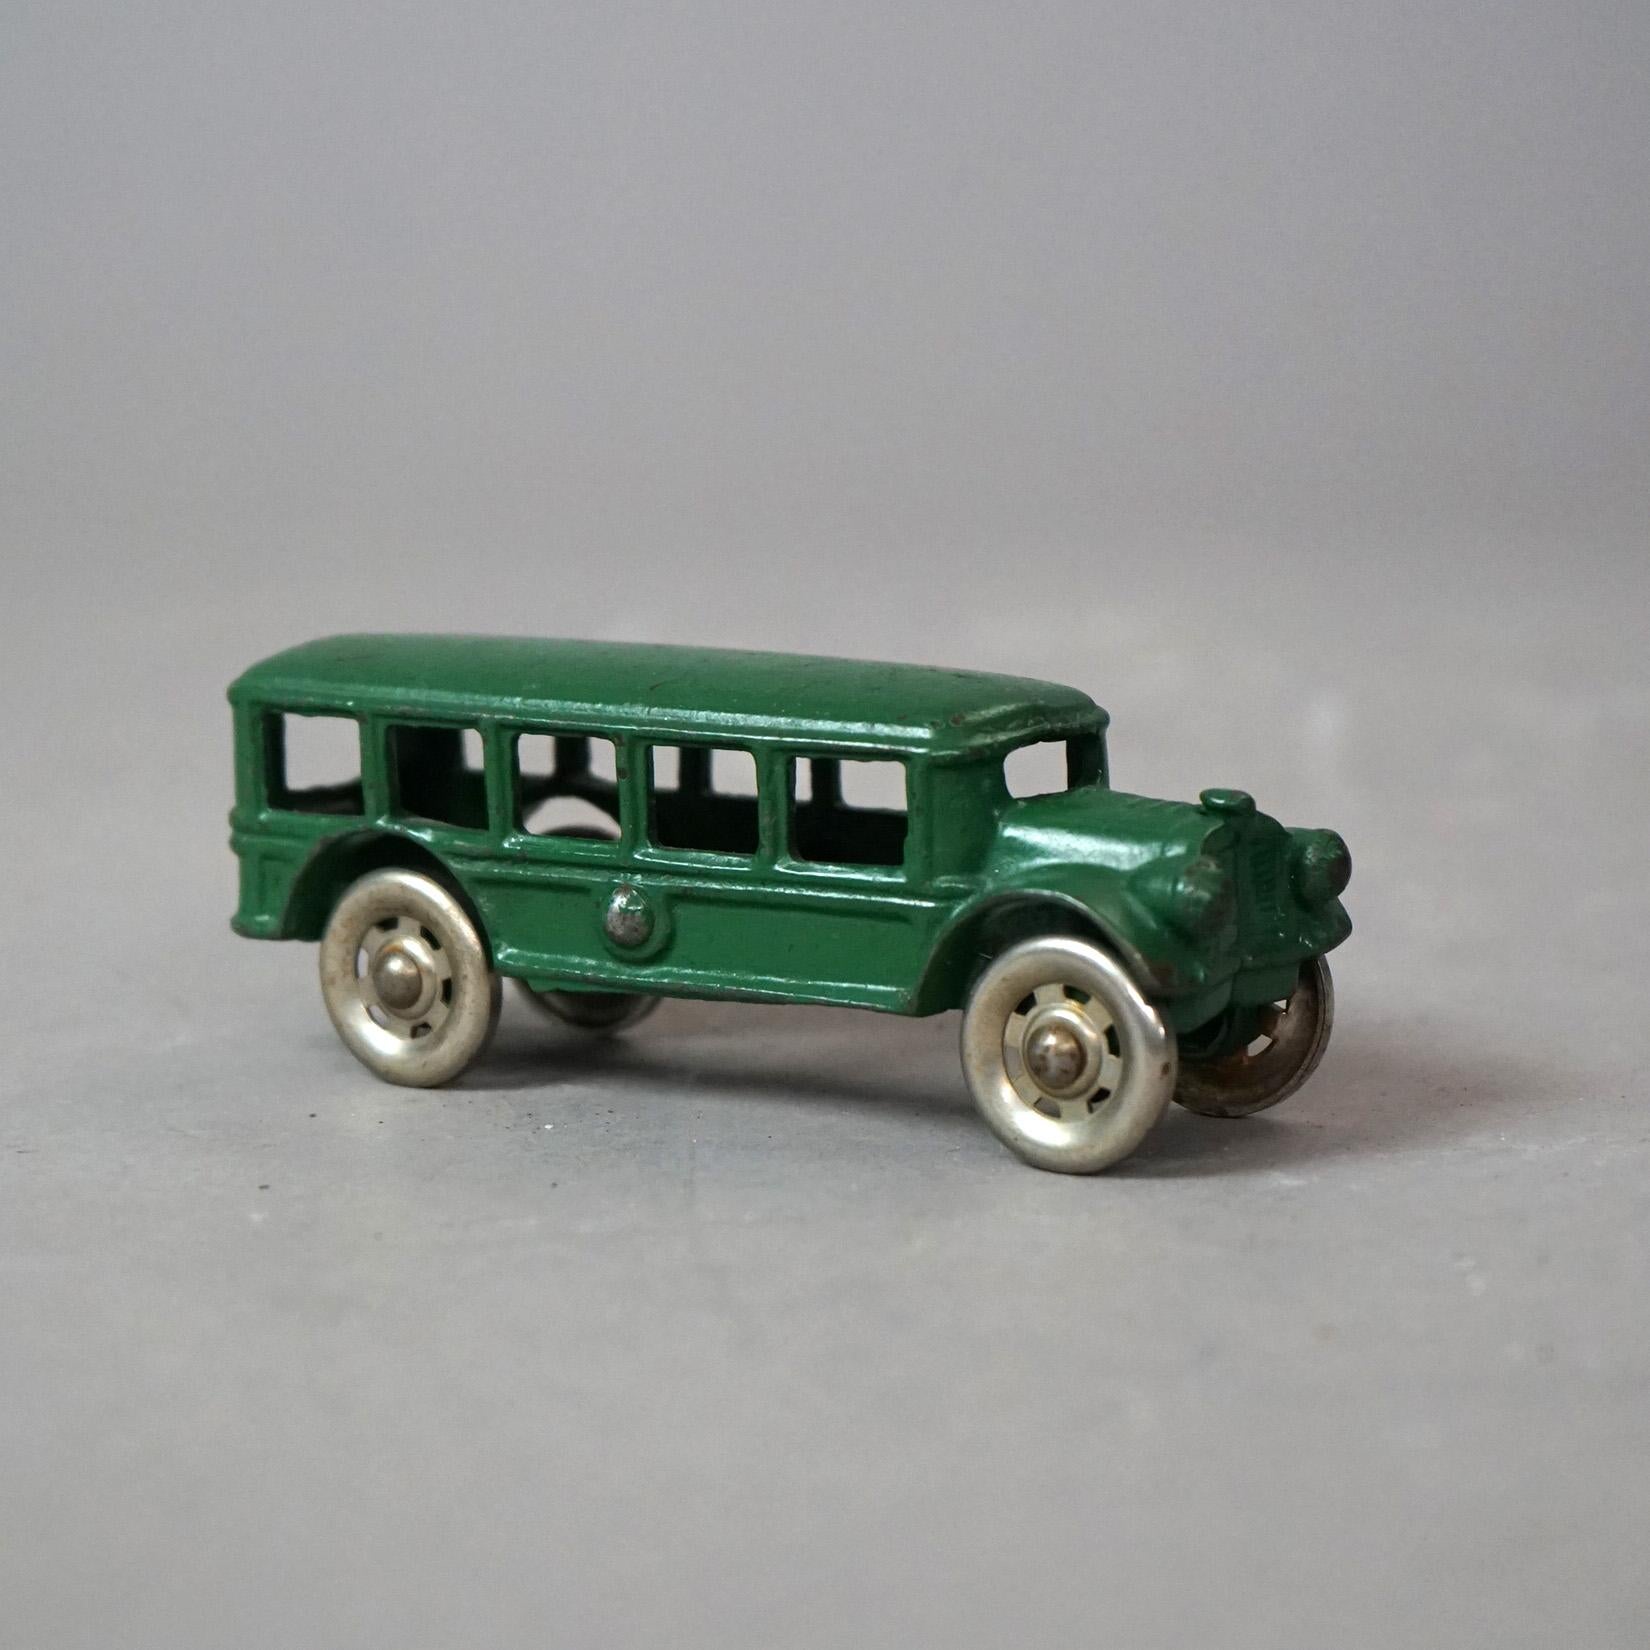 Antique Hurley Green Painted Cast Iron Toy Bus Circa 1930

Measures- 2''H x 2''W x 5''D